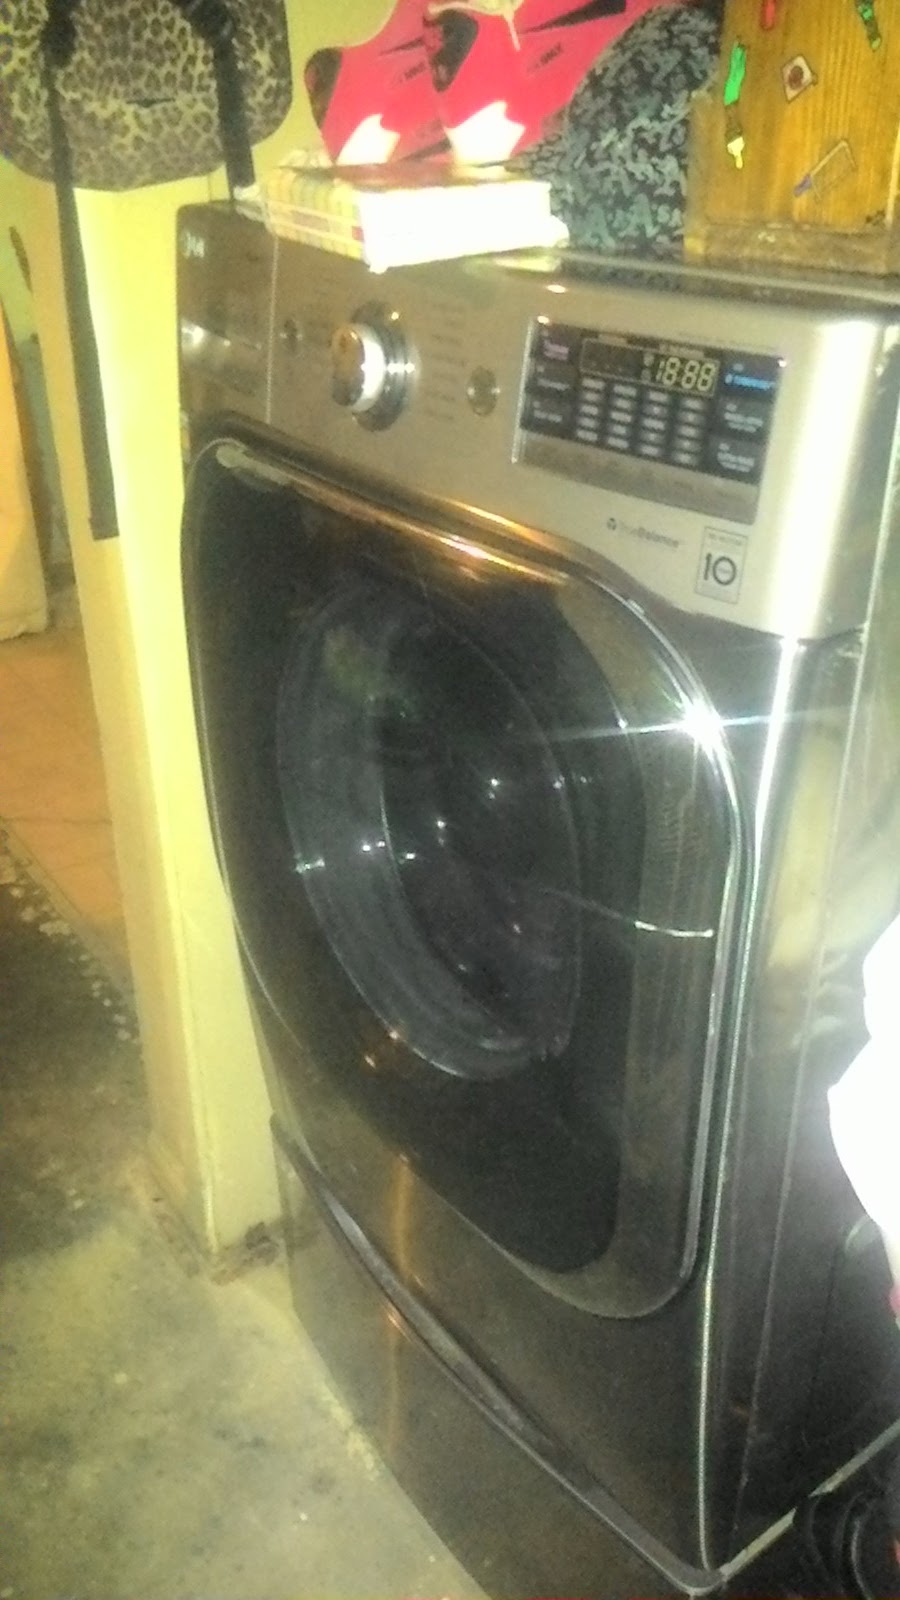 Budget Appliance Sales And Service | 3605 N Foster Dr, Baton Rouge, LA 70805, USA | Phone: (225) 356-7862